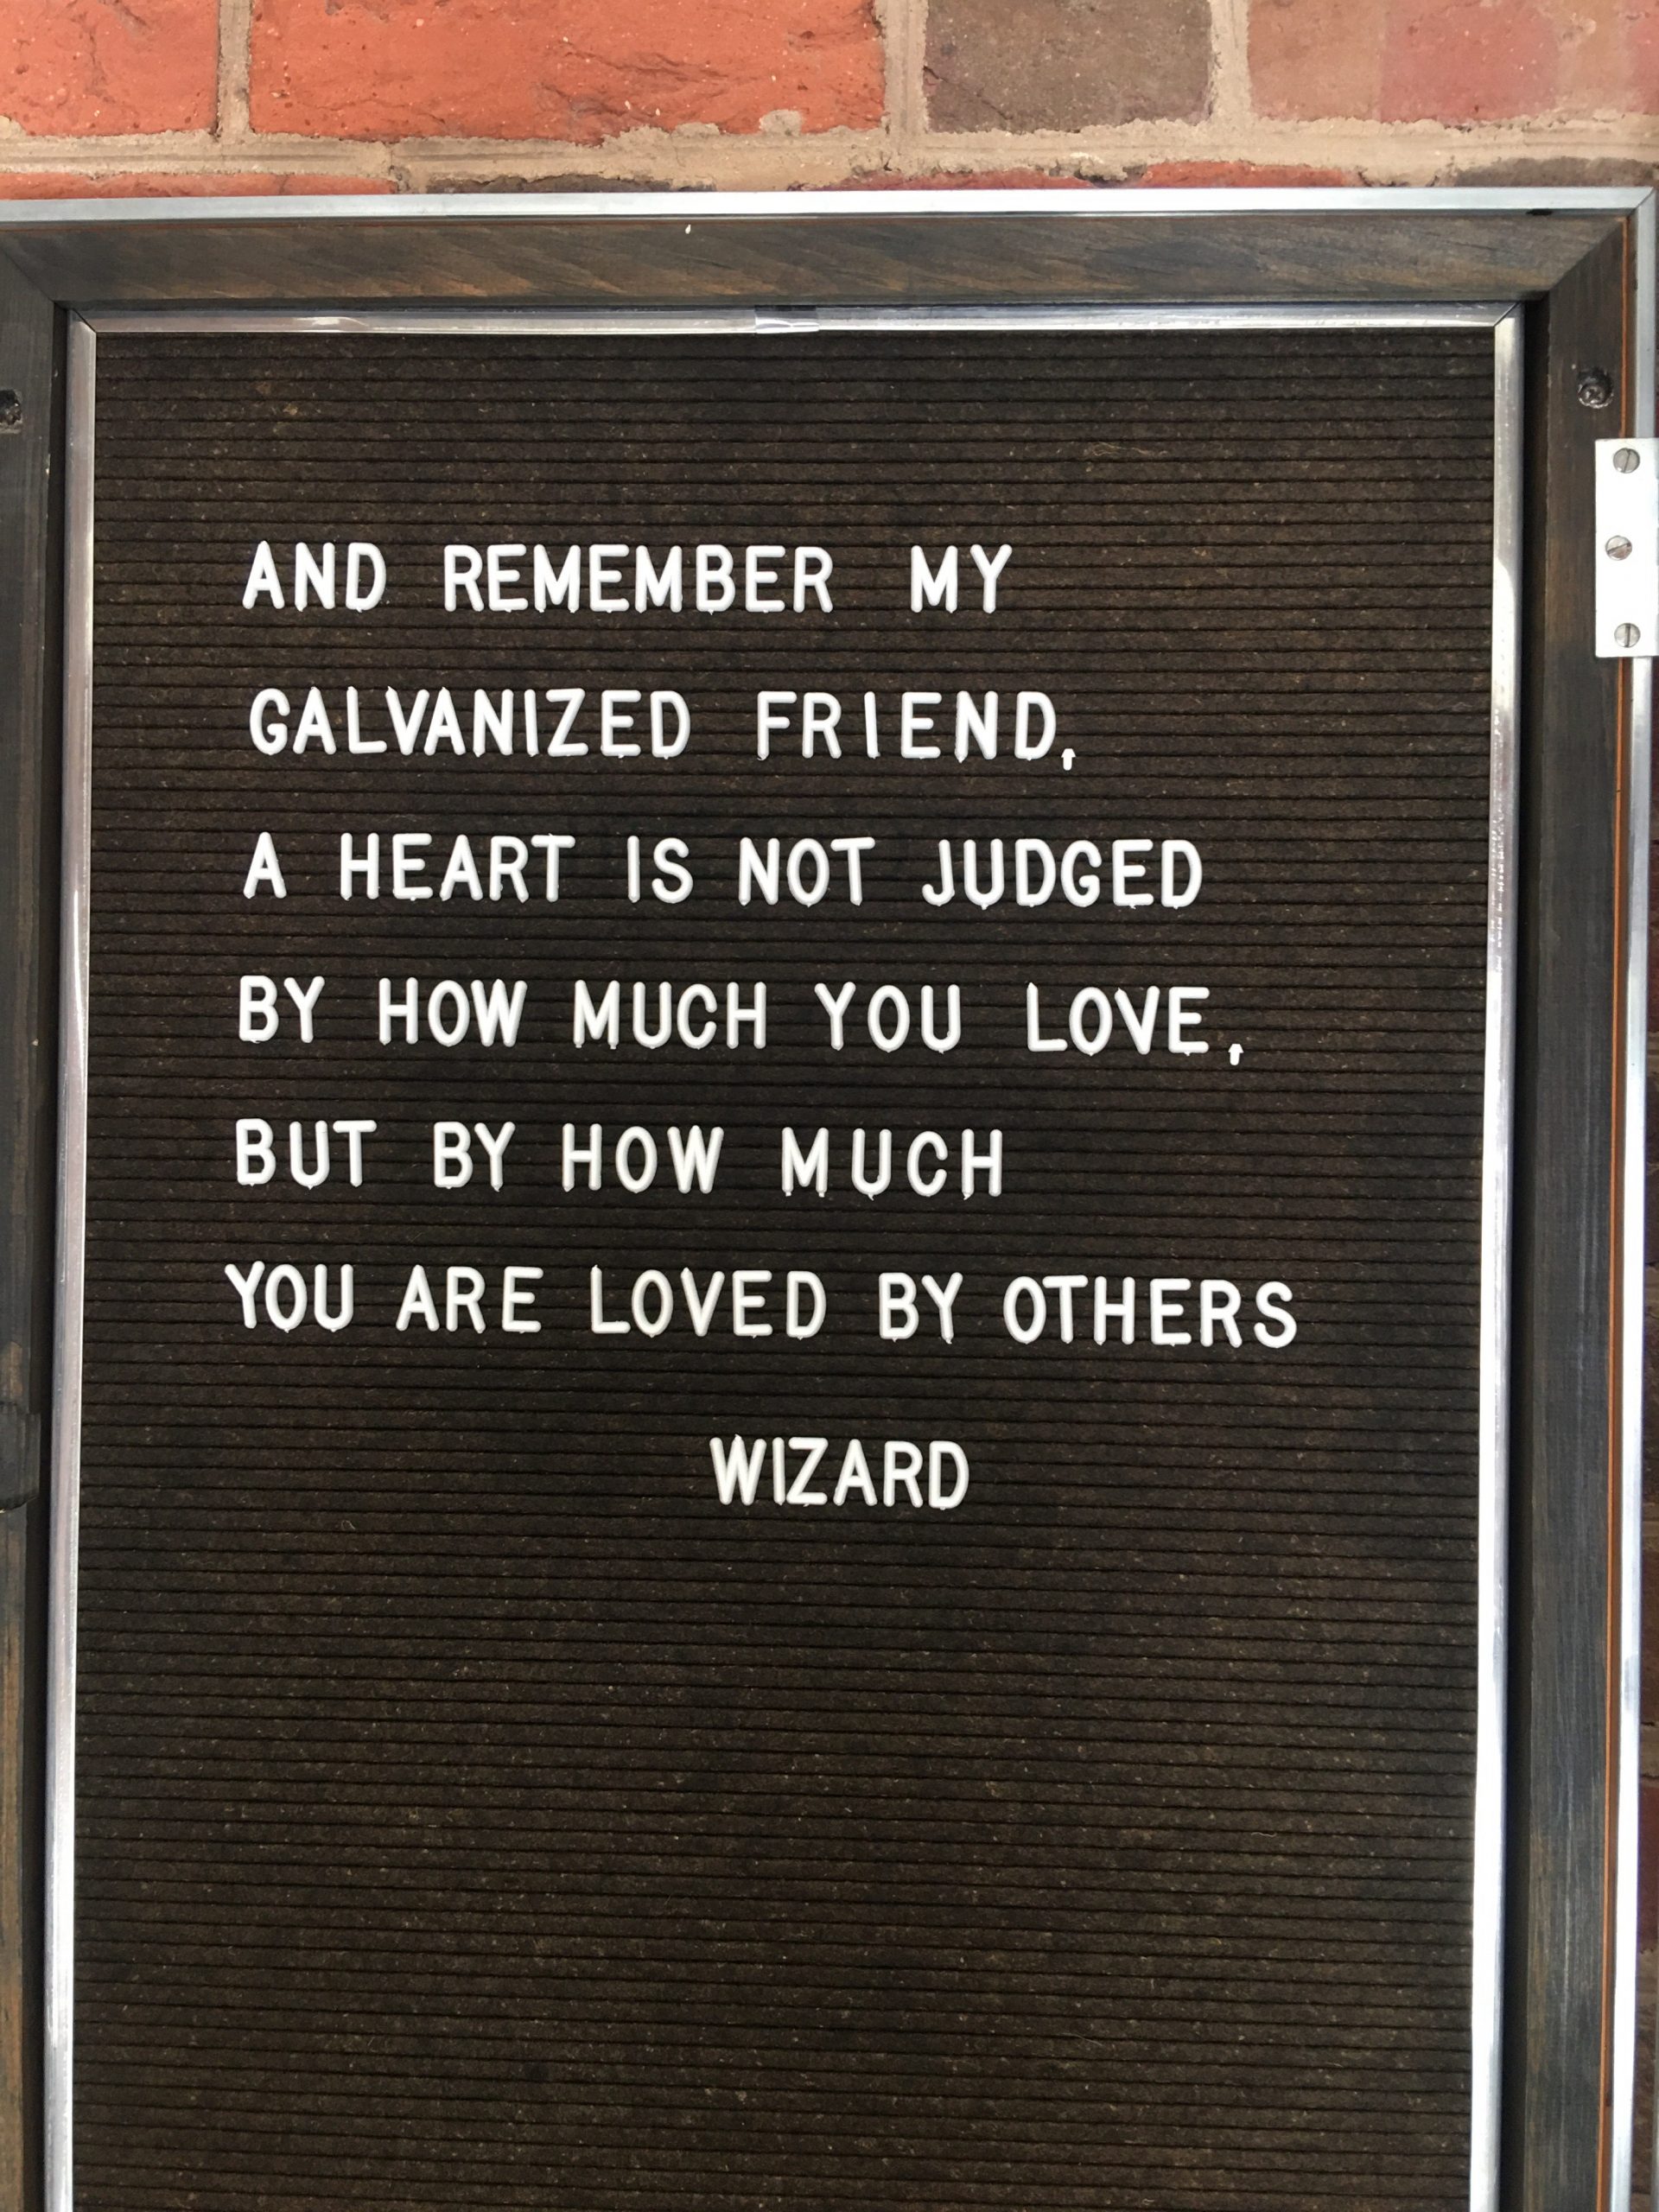 Motivational quote by Wizard